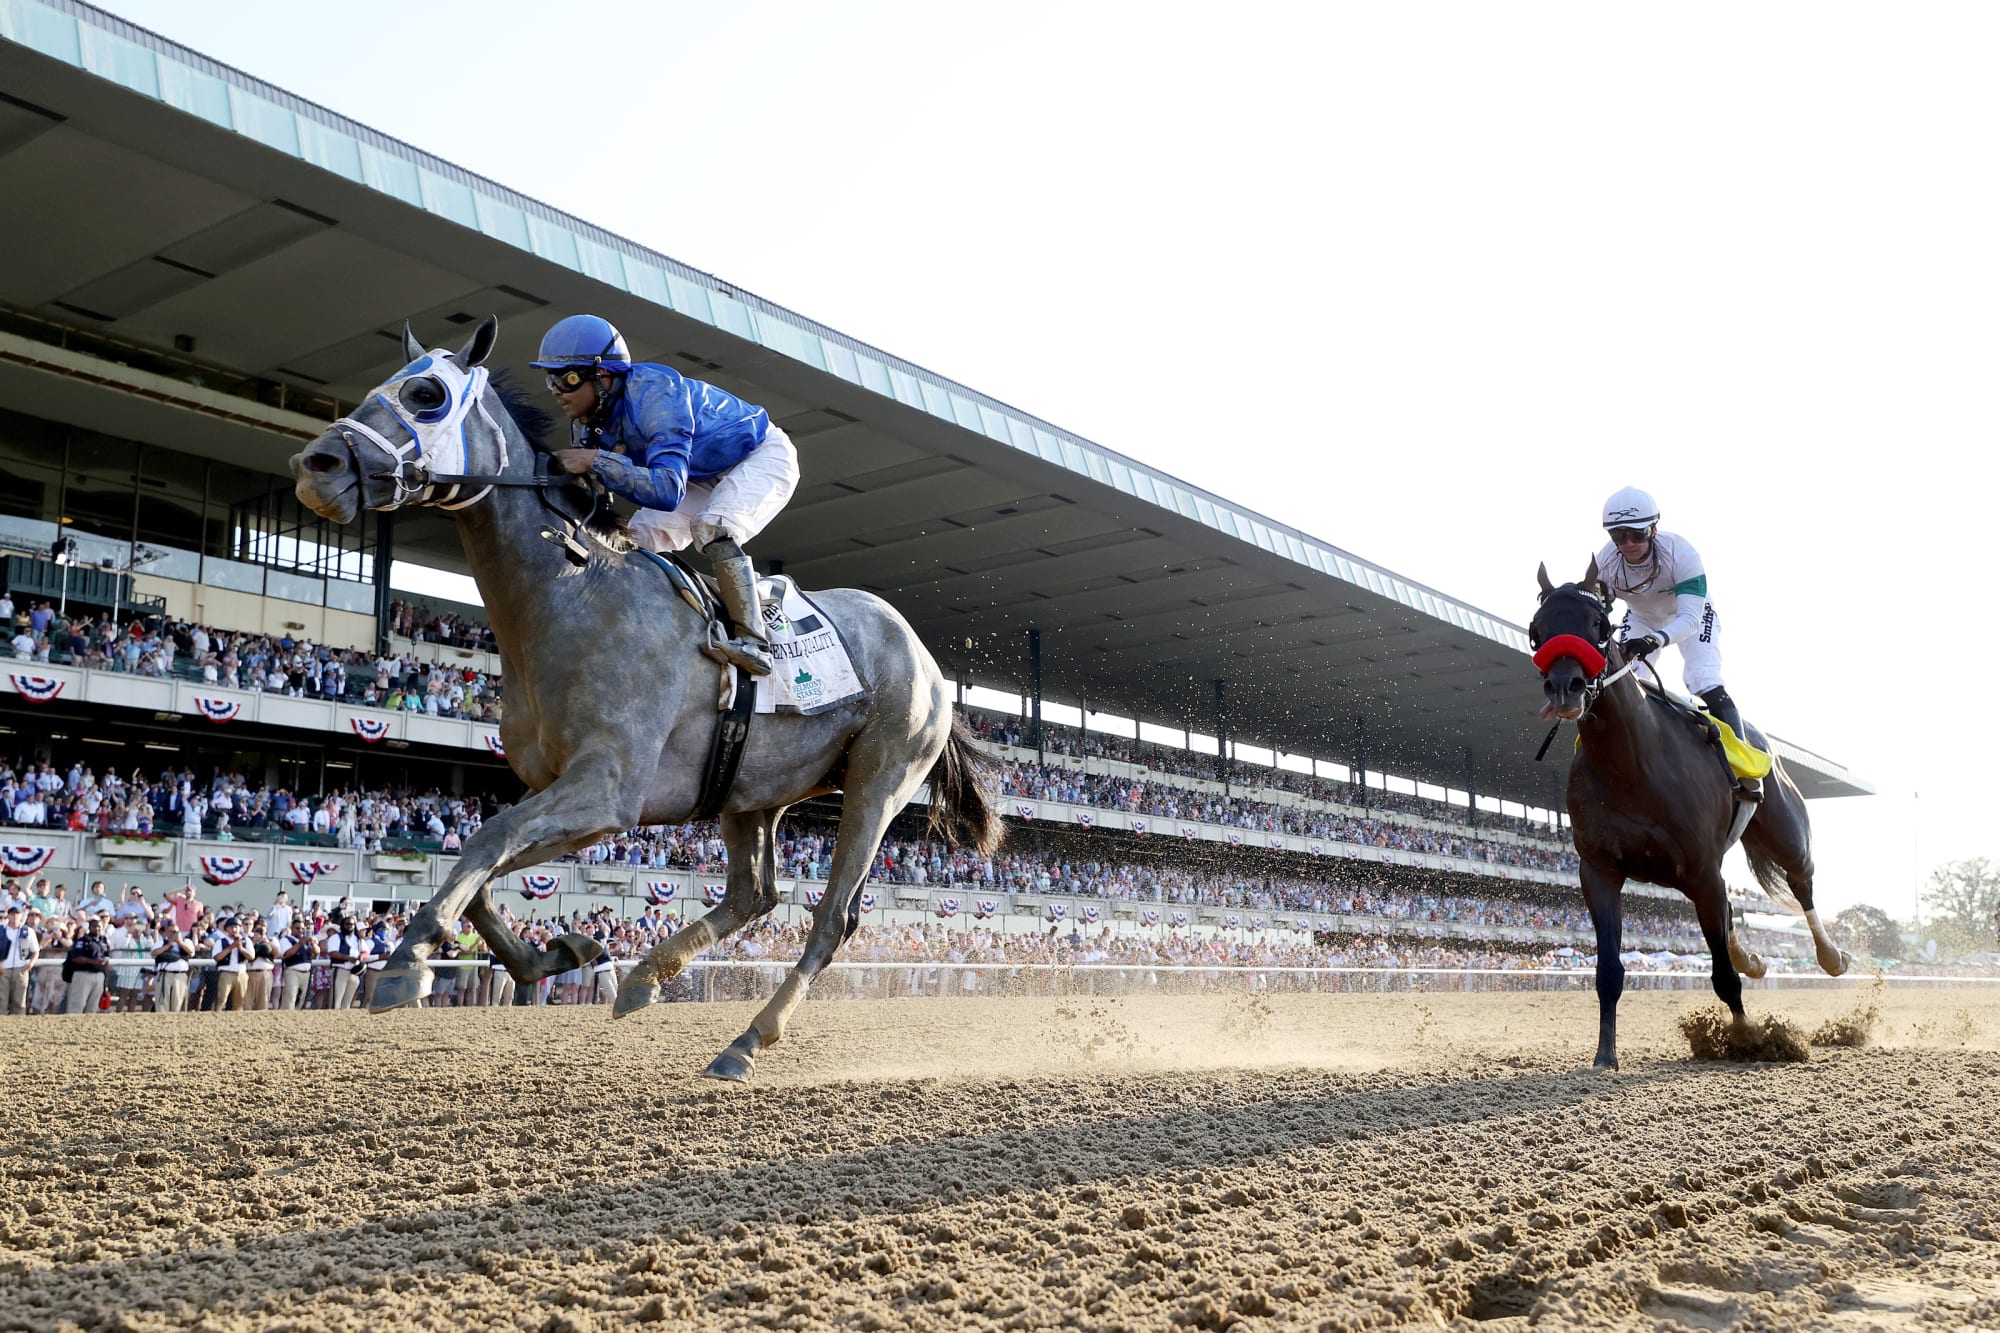 Who won the Belmont Stakes in 2021?